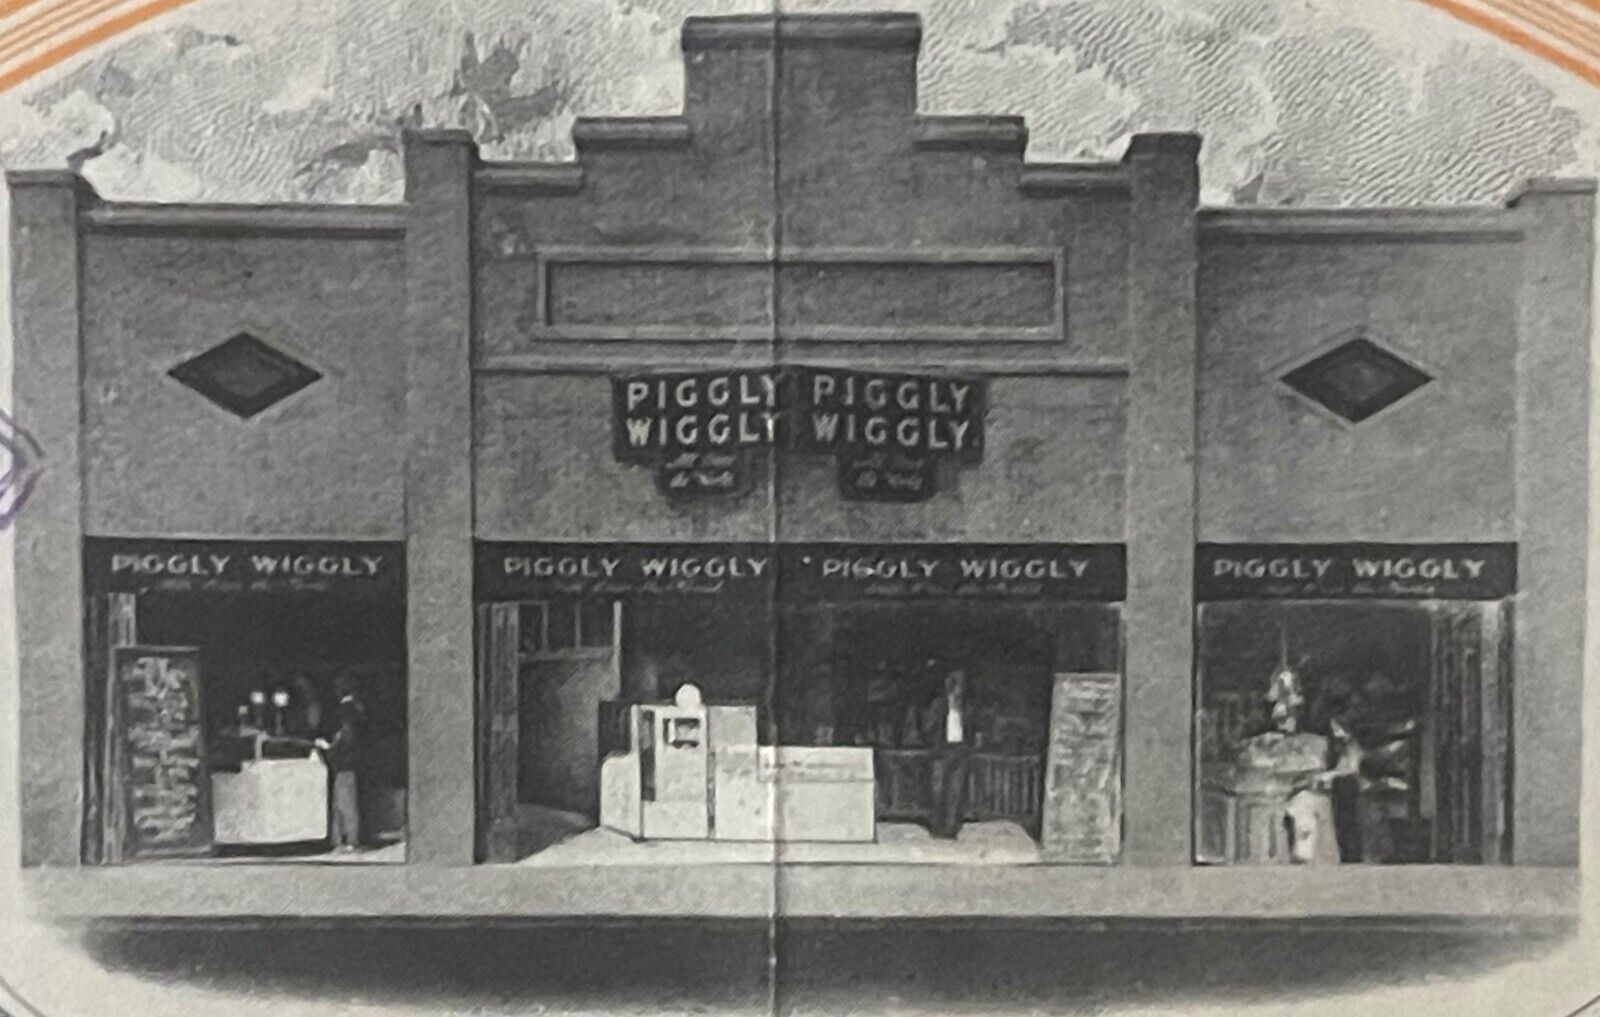 Rare 1926 🐖 Piggly Wiggly Stock Certificate, First Self-Service Grocery Store